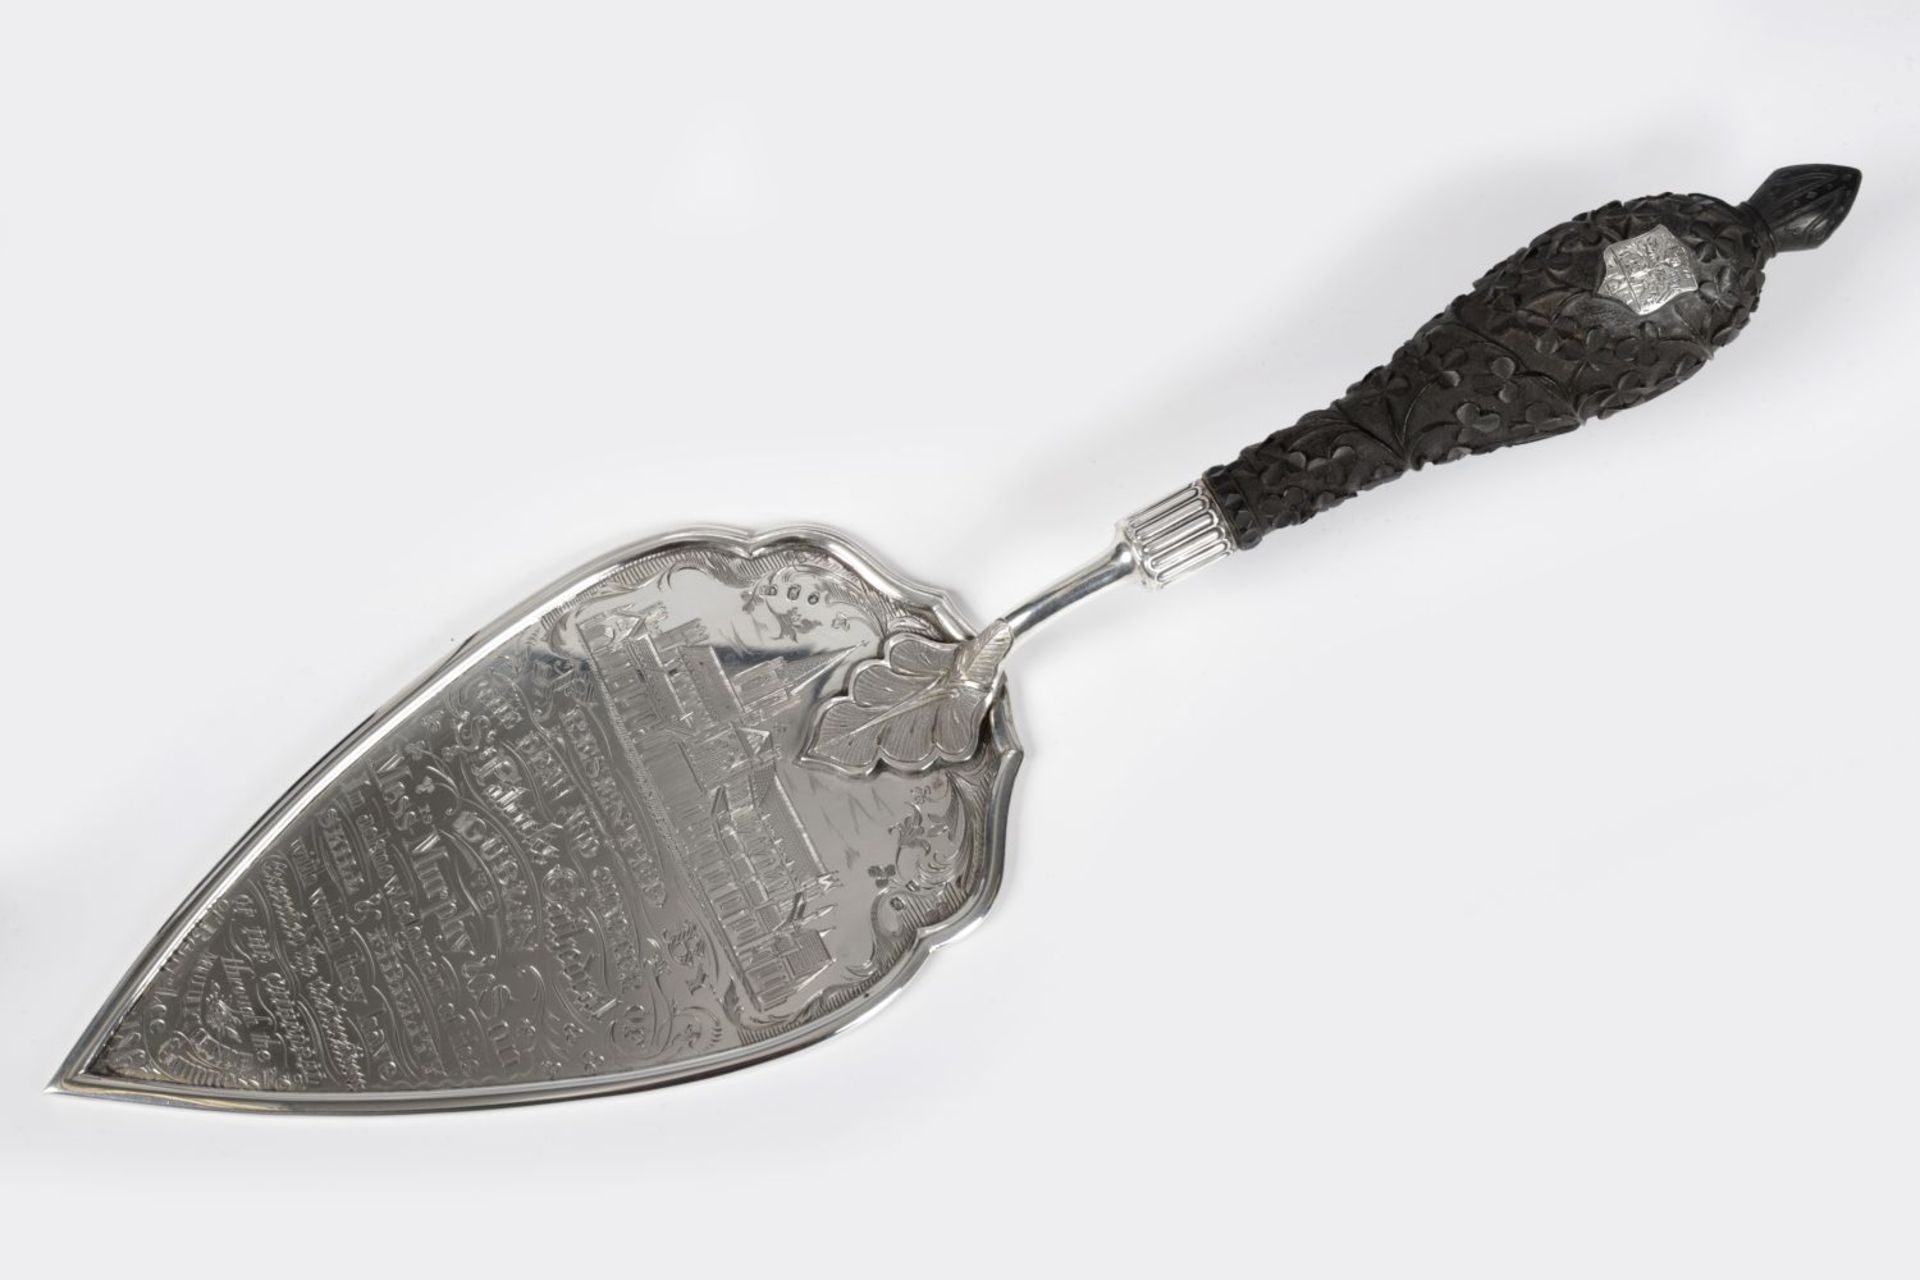 ST. PATRICK'S CATHEDRAL SILVER PRESENTATION TROWEL